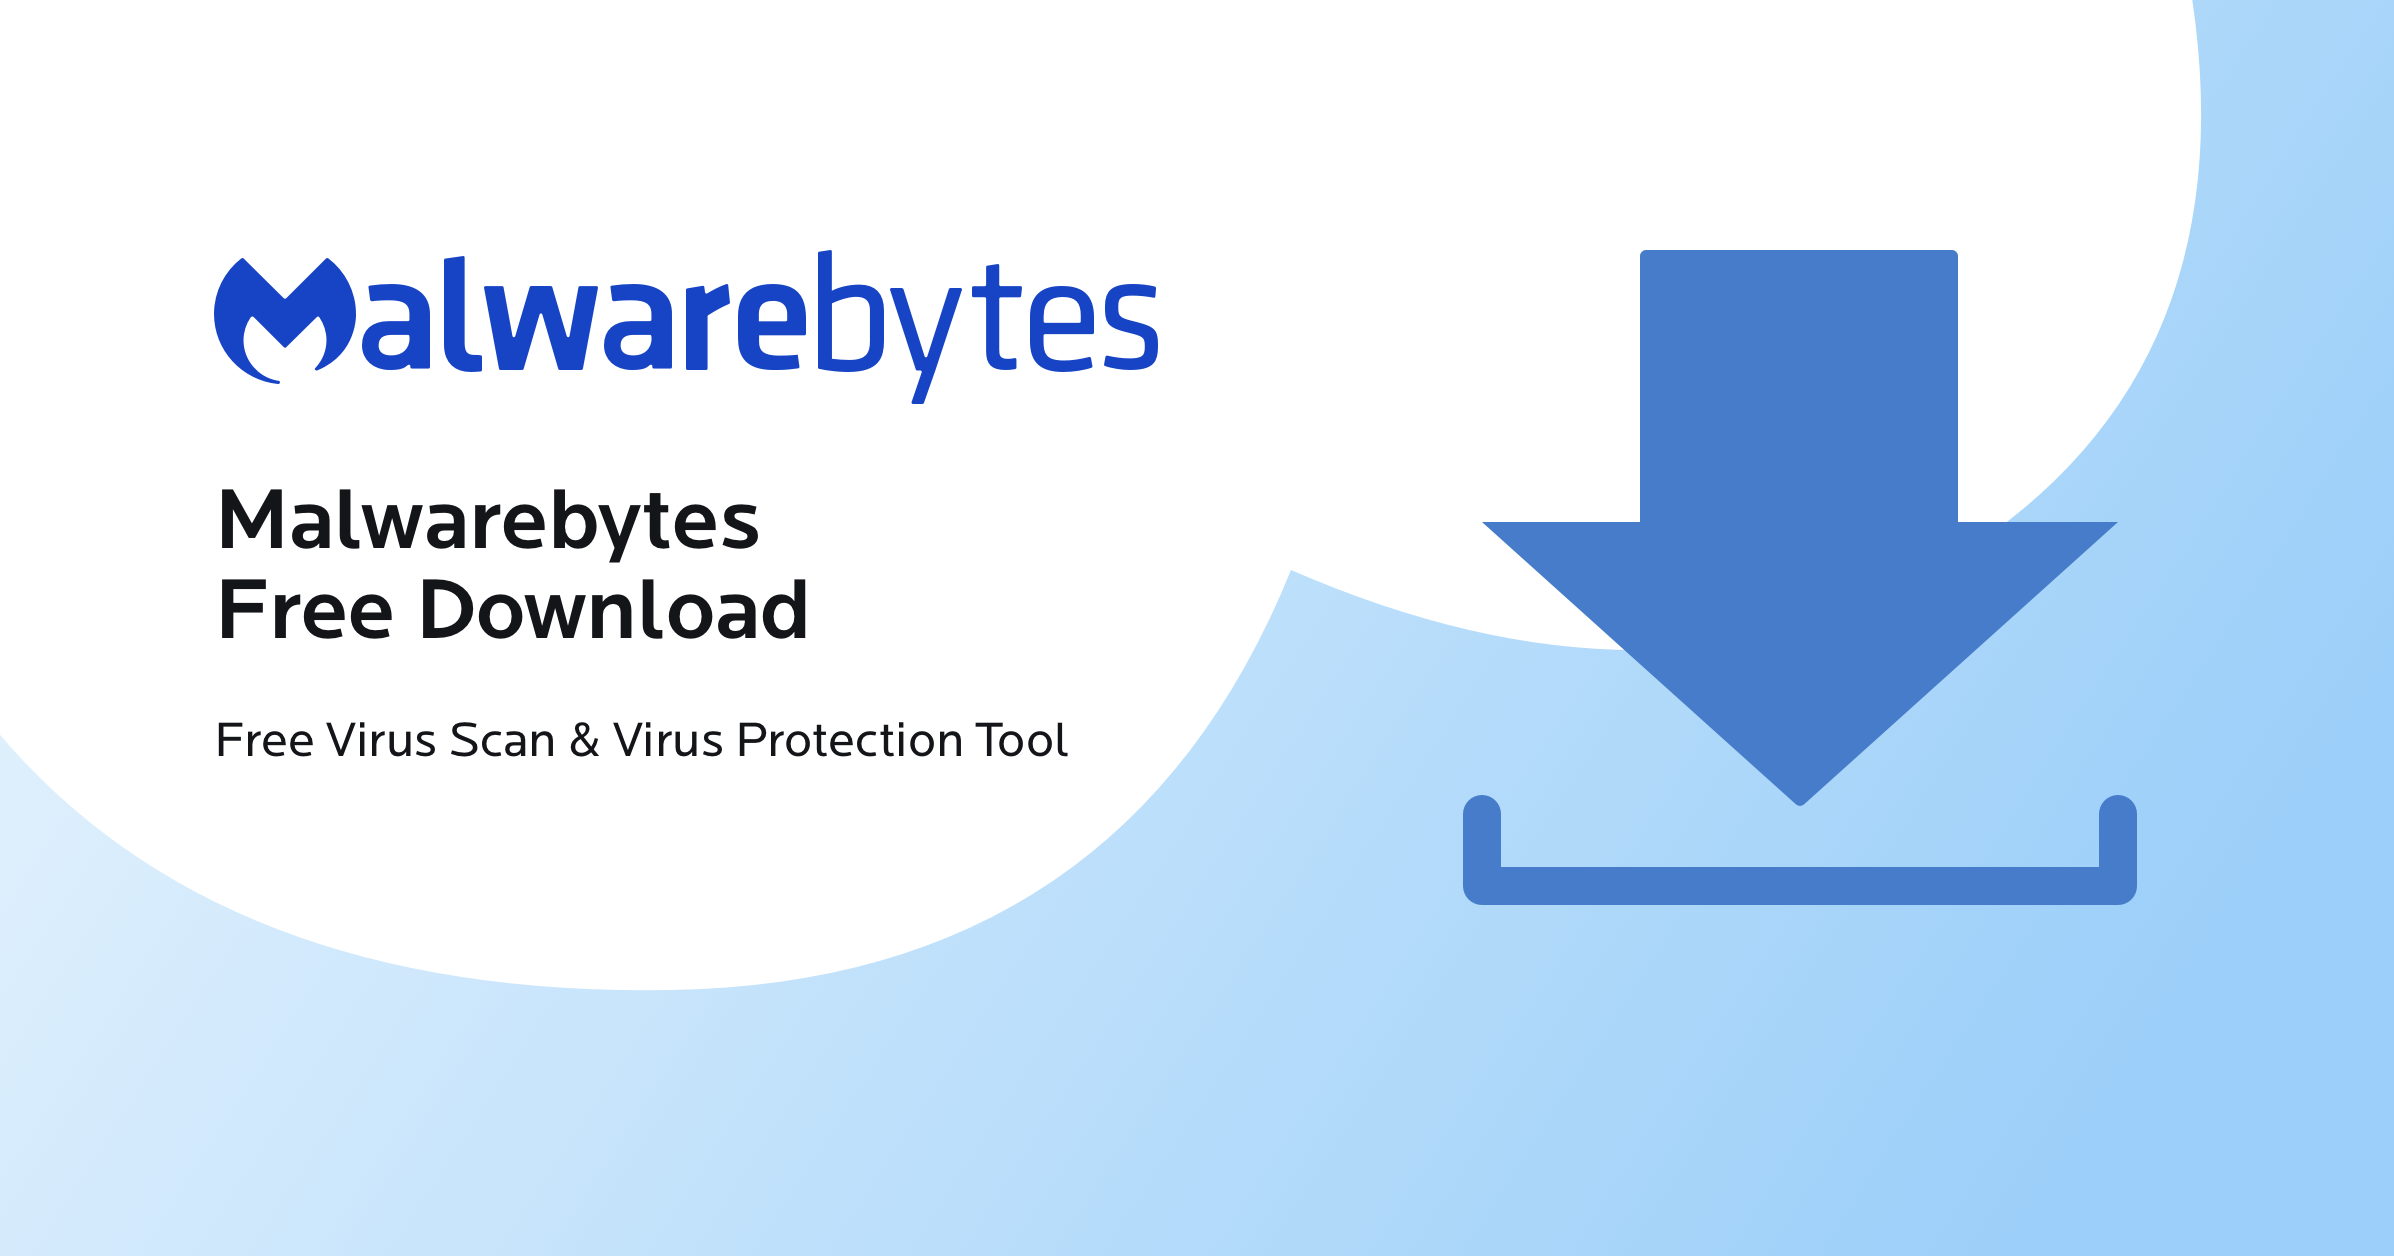 Antivirus Software: Use a reputable antivirus program such as Avast, Norton, or McAfee to scan and remove bomerman.exe from your system.
Malwarebytes: Malwarebytes is an effective tool for detecting and removing malware, including bomerman.exe. Run a scan using Malwarebytes to eliminate the threat.